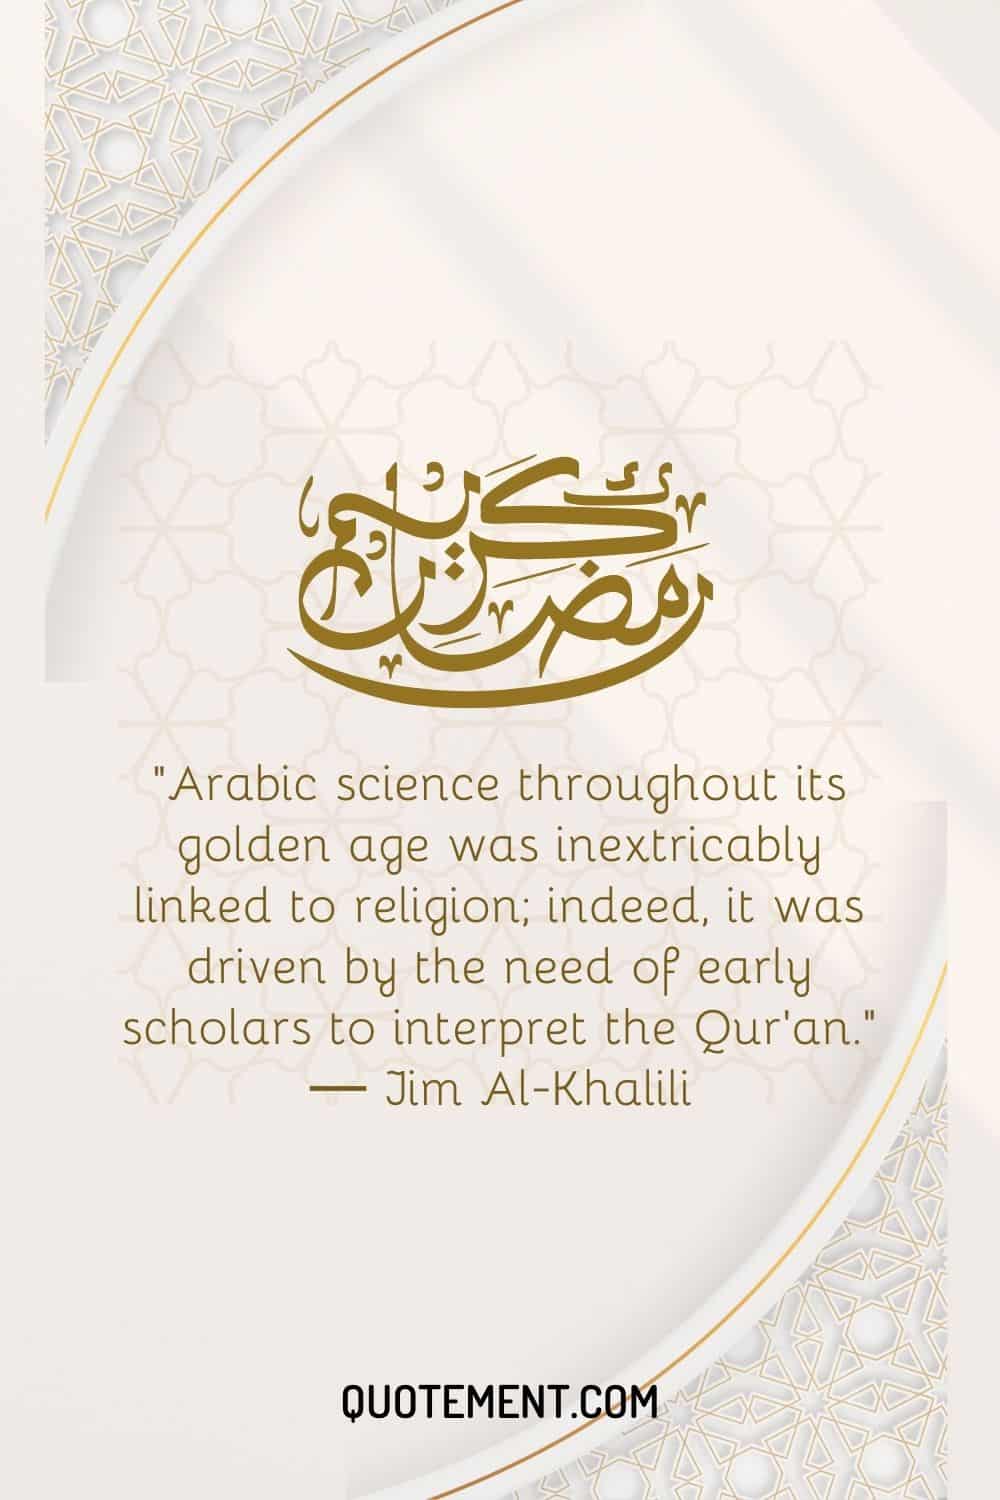 Arabic science throughout its golden age was inextricably linked to religion; indeed, it was driven by the need of early scholars to interpret the Qur'an